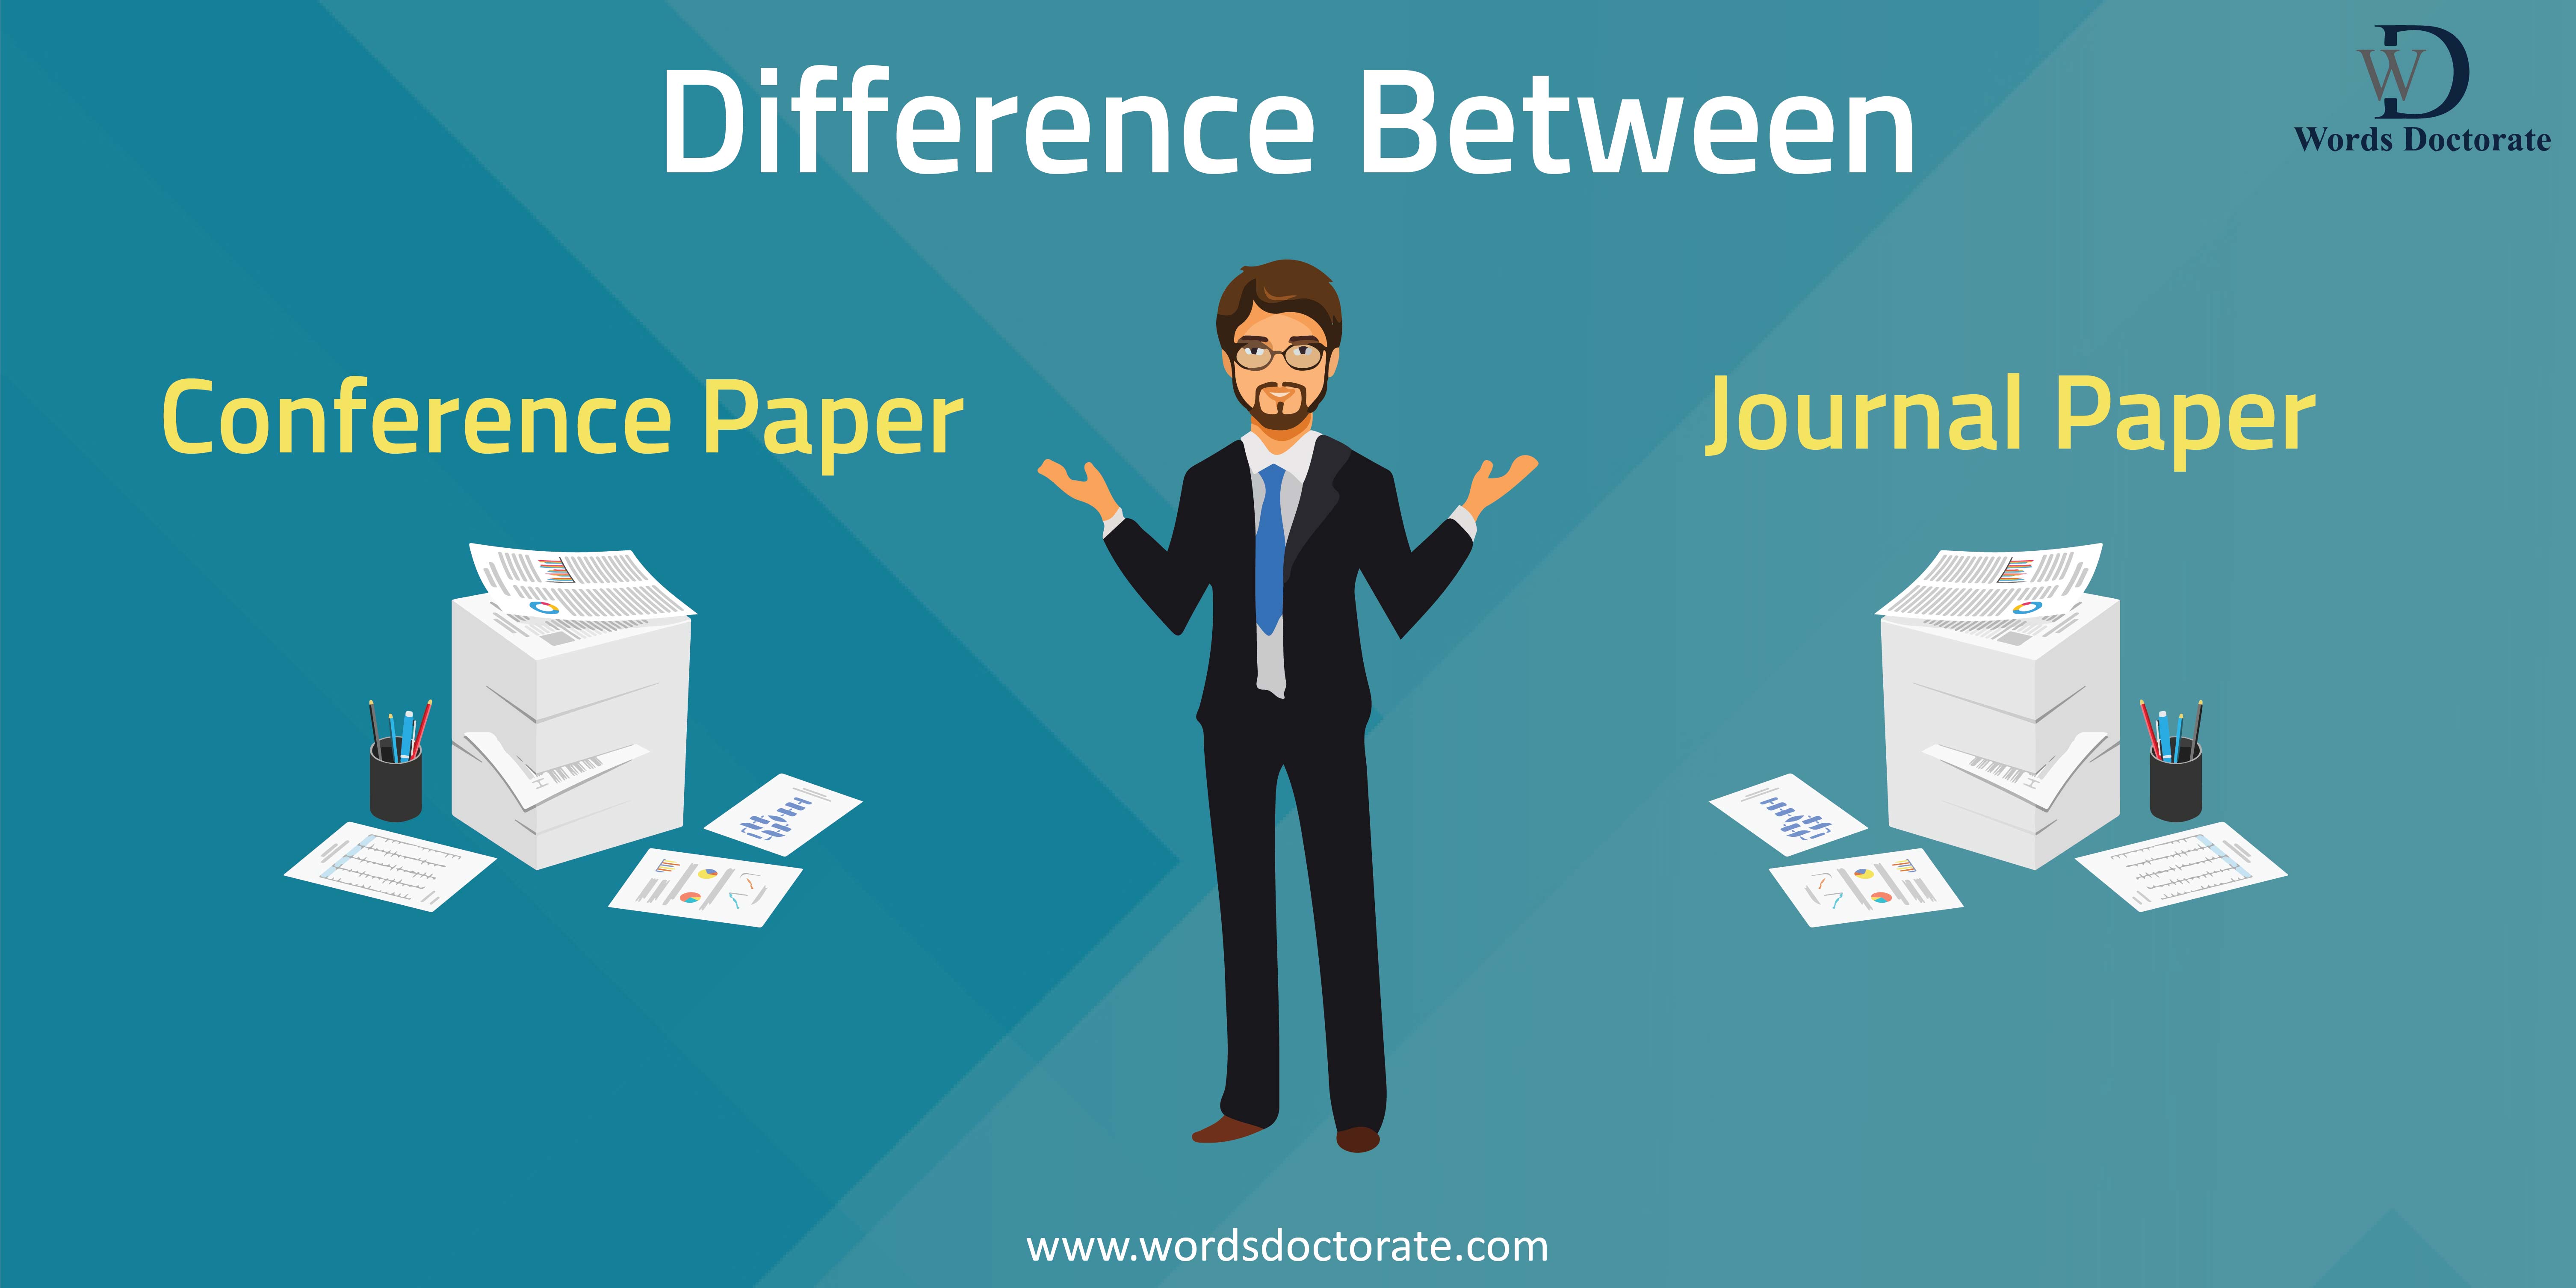 Difference between Conference Paper and Journal Paper